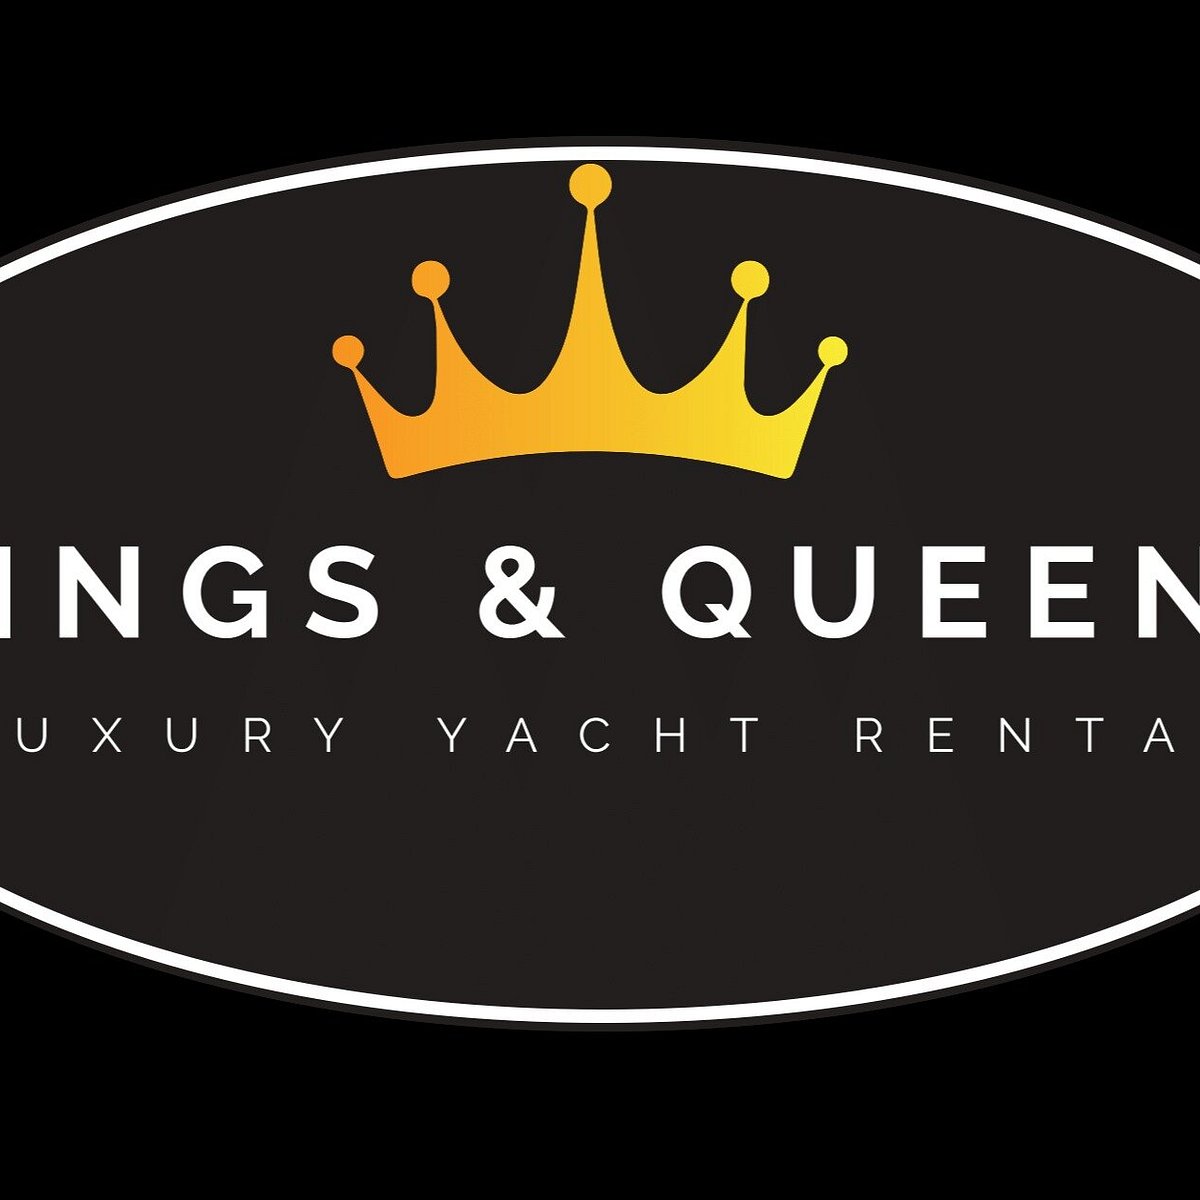 kings and queens yachts dubai